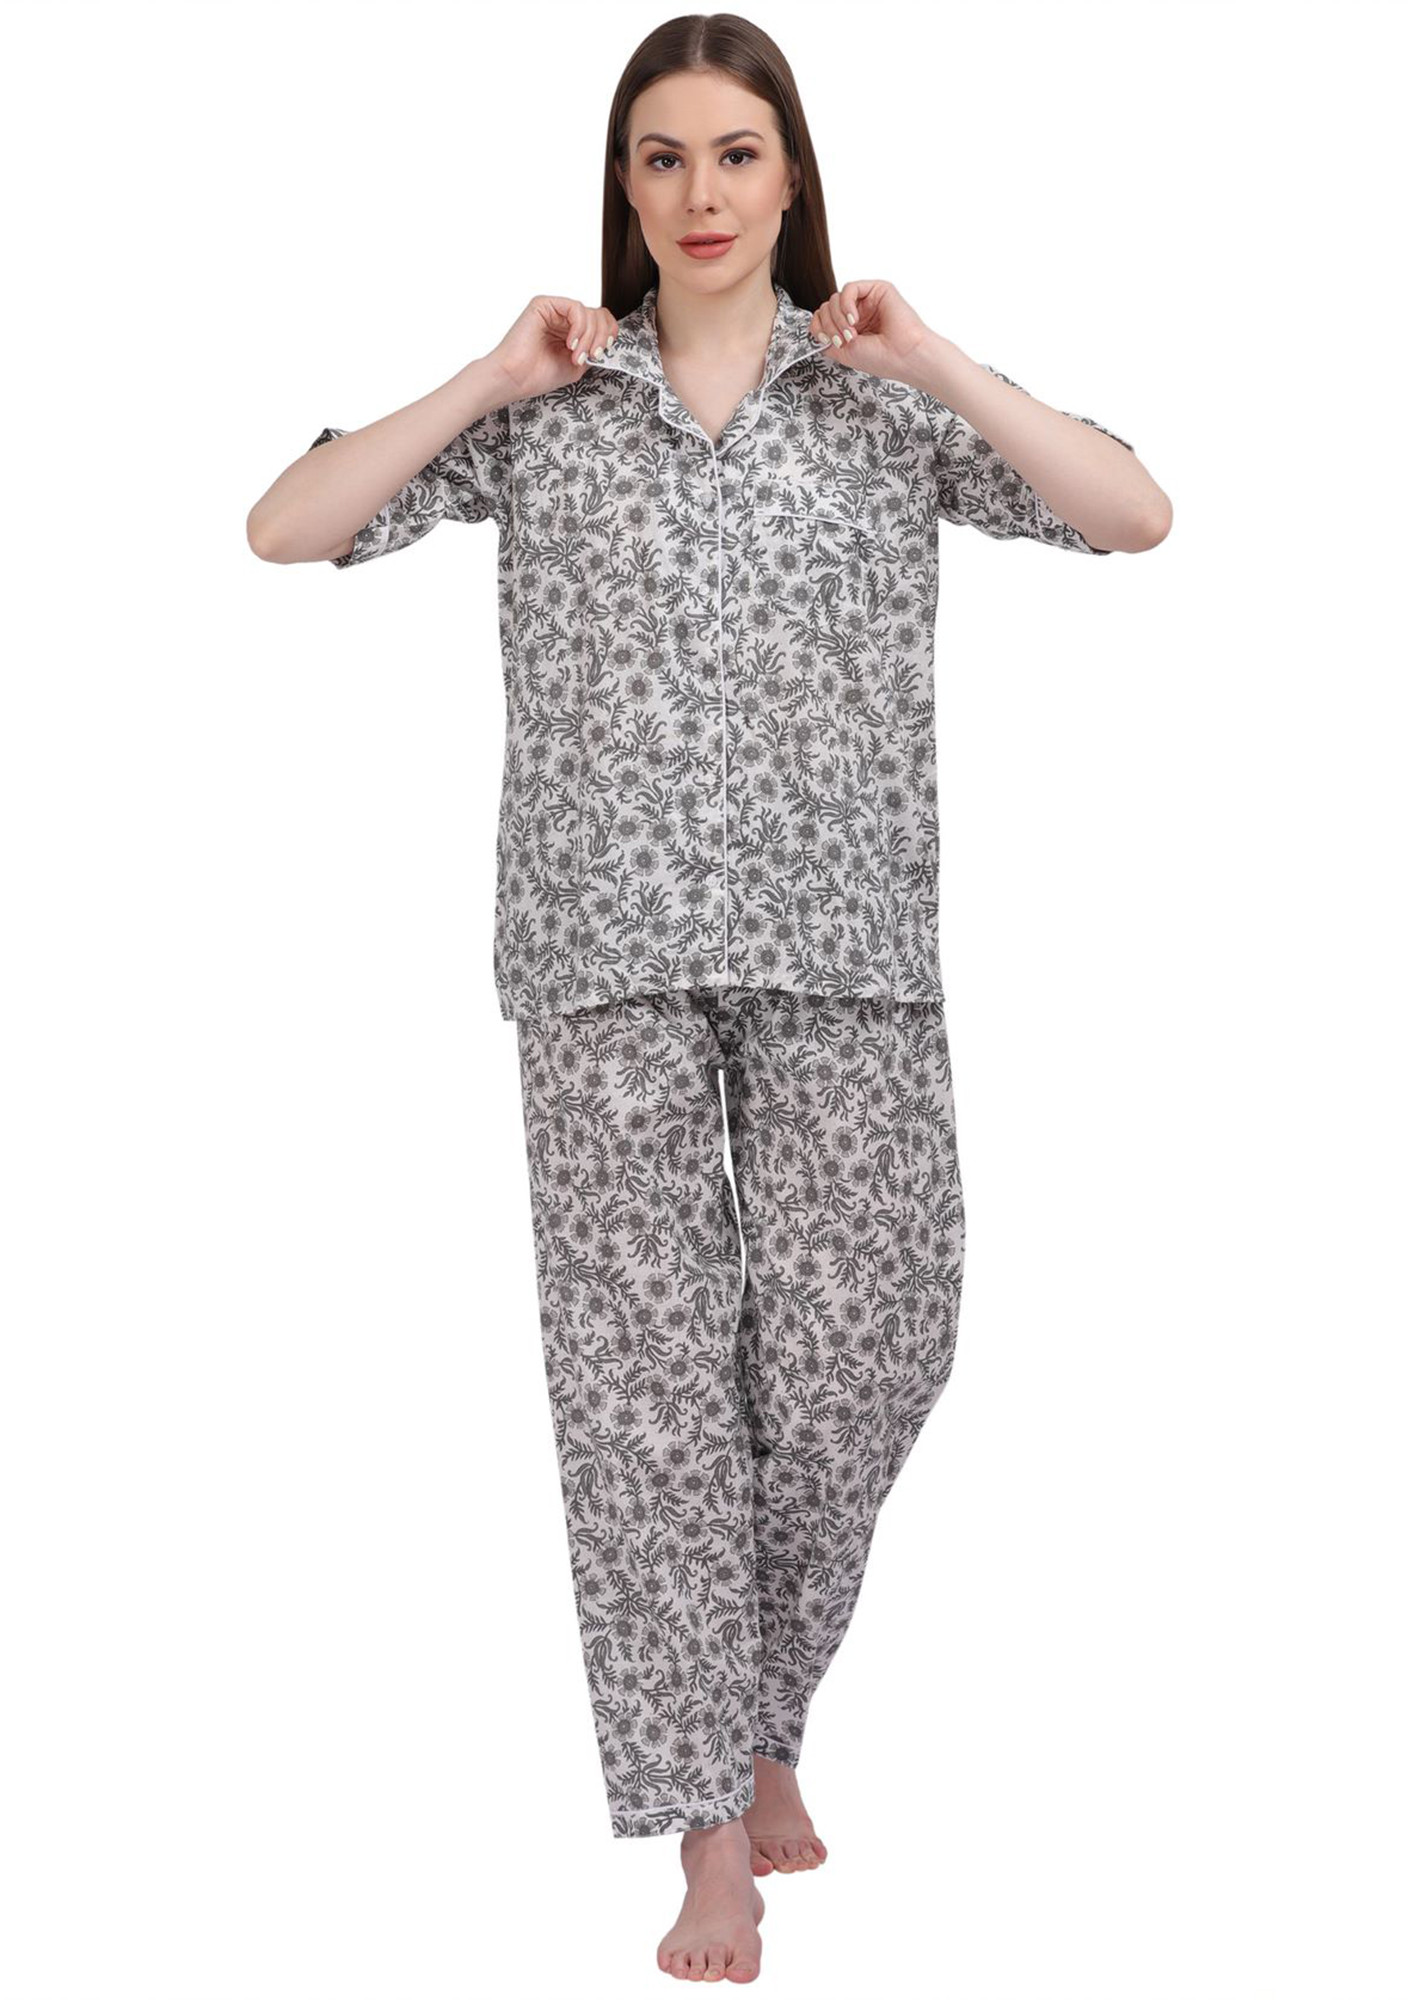 The Birdbox Project Women's Floral Block Printed 100% Cotton Nightsuit Set Straight Fit Half Sleeves Night Suit Button Down Lounge Wear Pyjama Top Grey Floral-